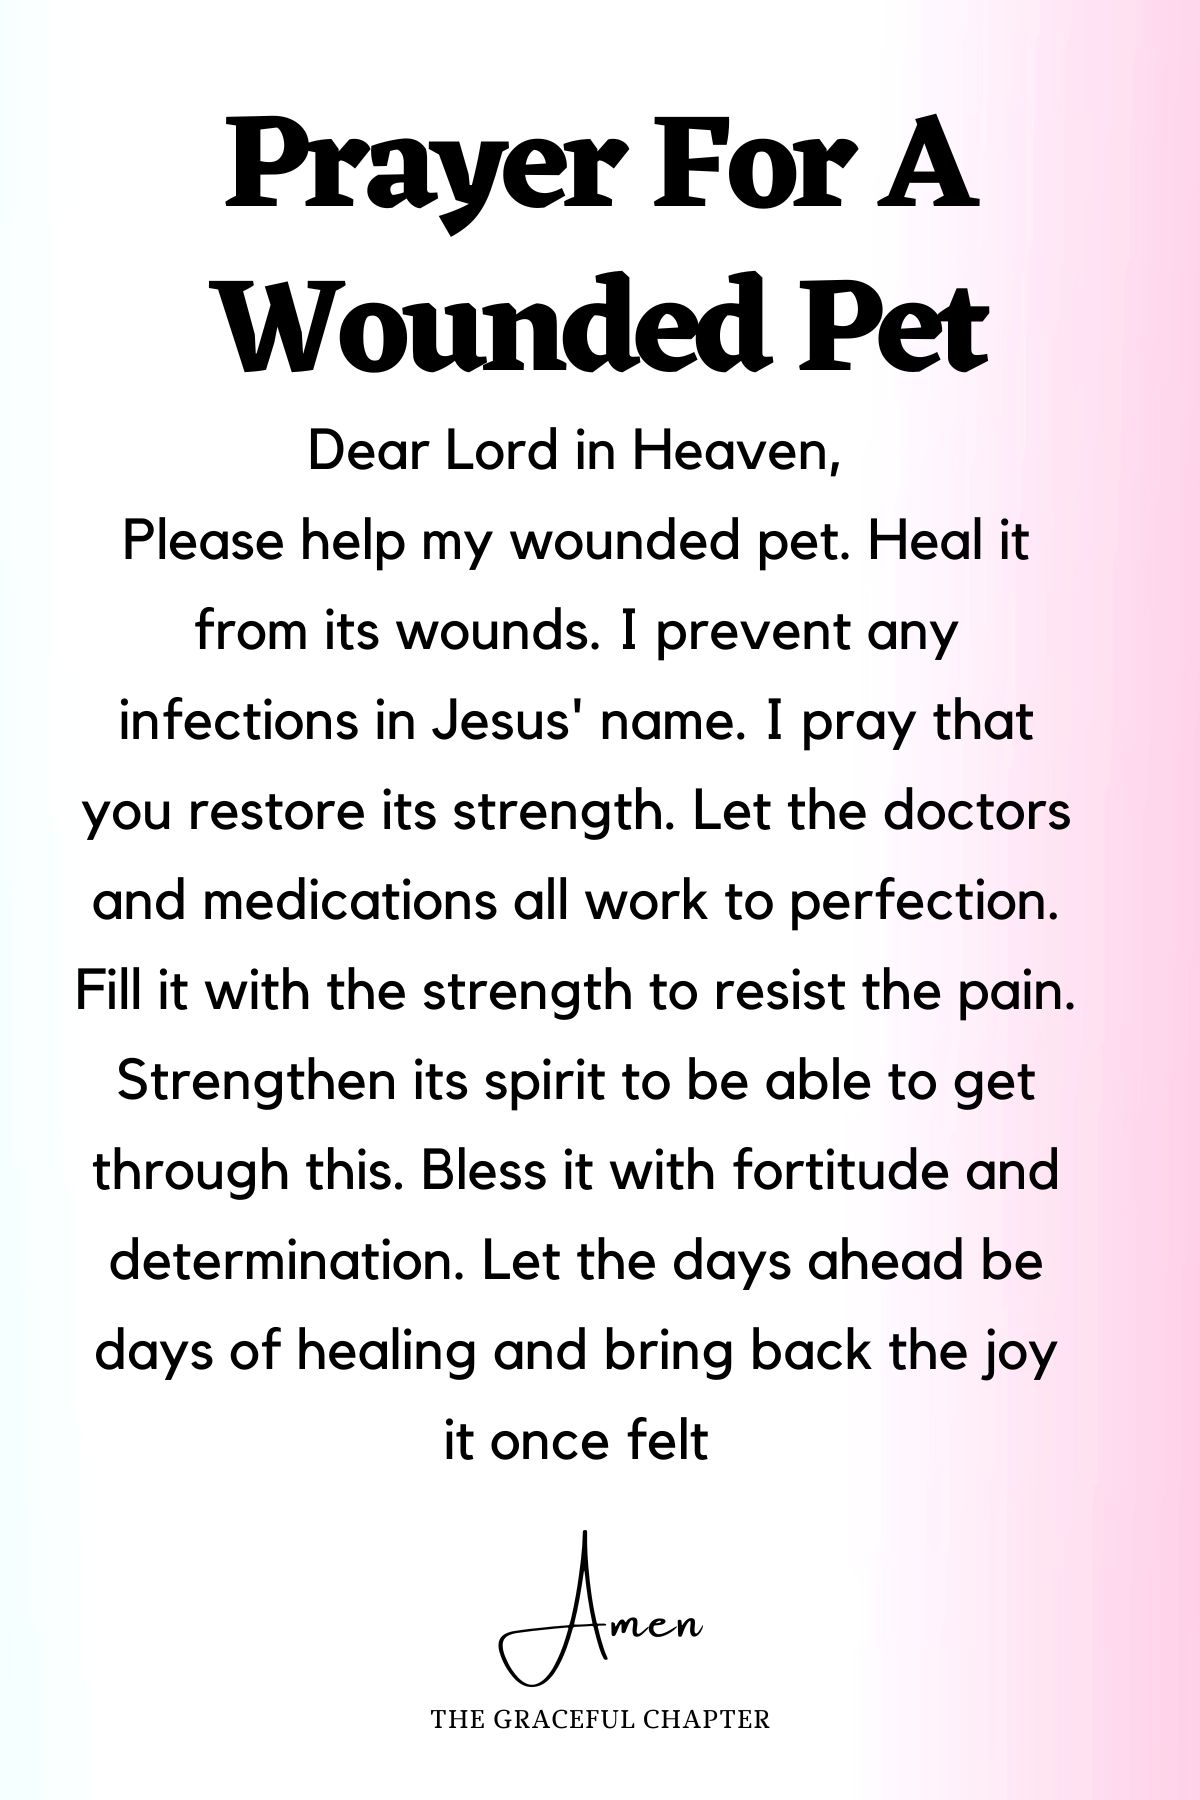 Prayer for a wounded pet